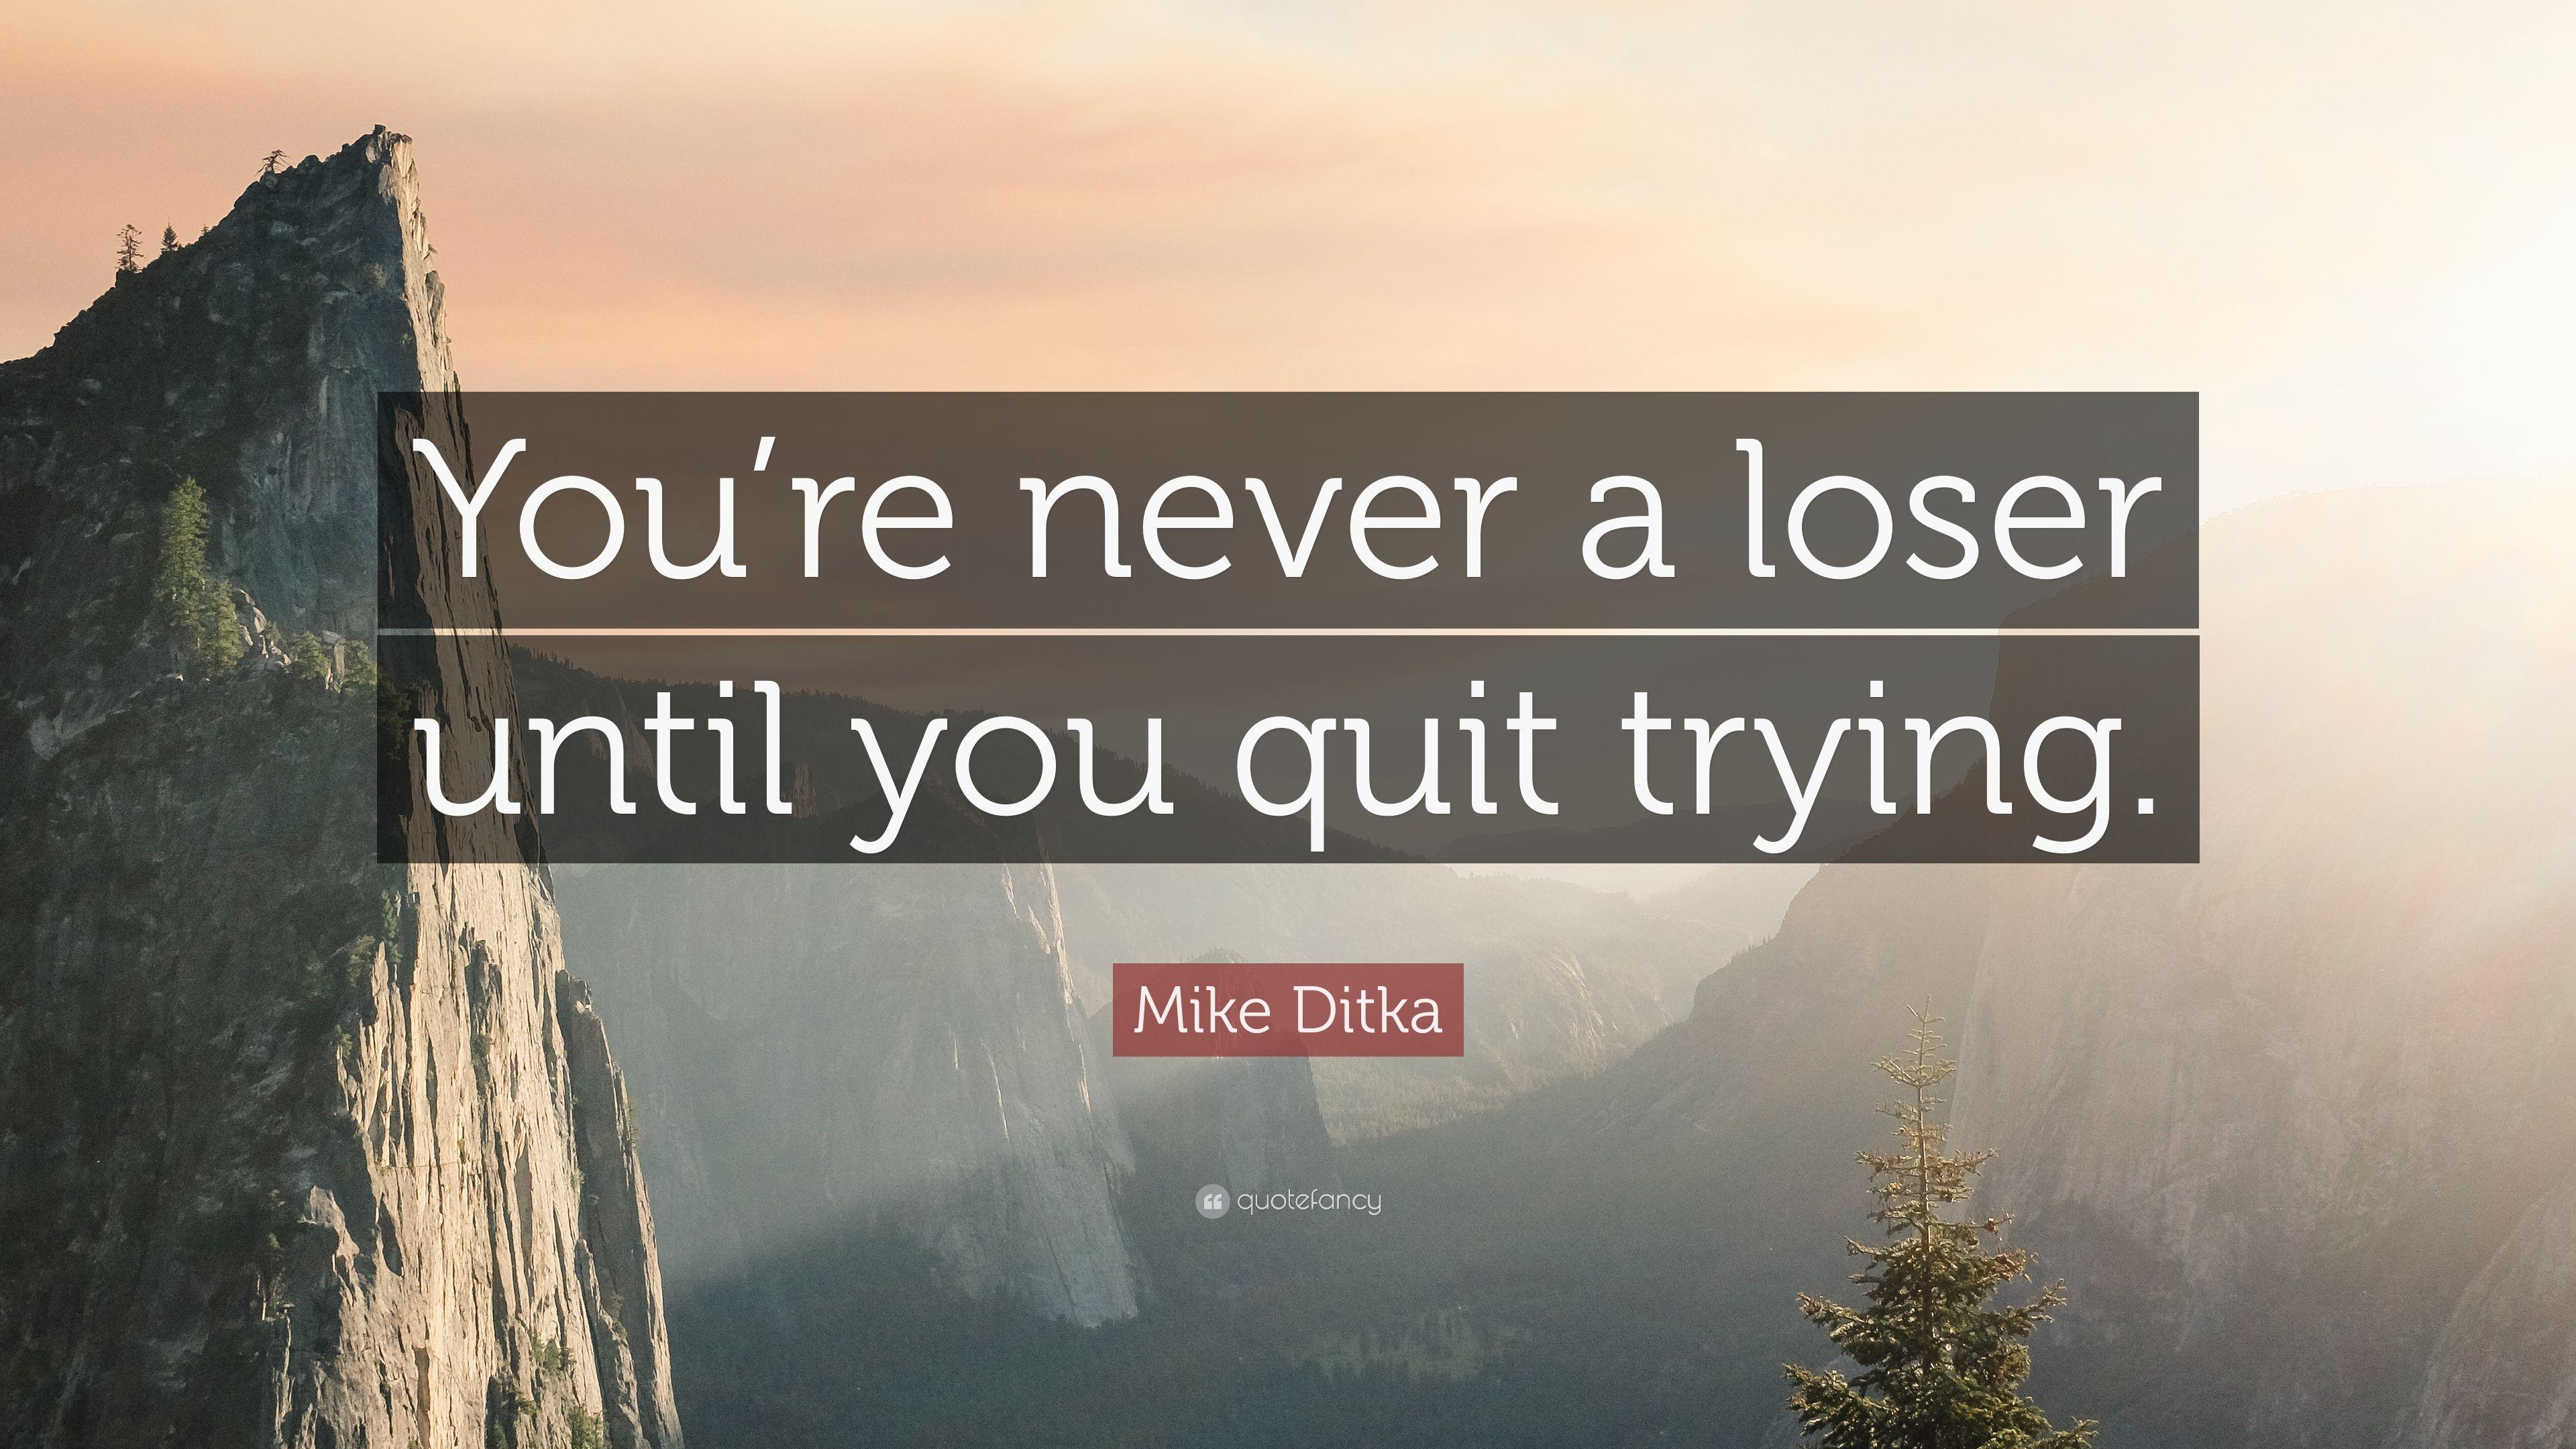 Mike Ditka Quote: “You're never a loser until you quit trying